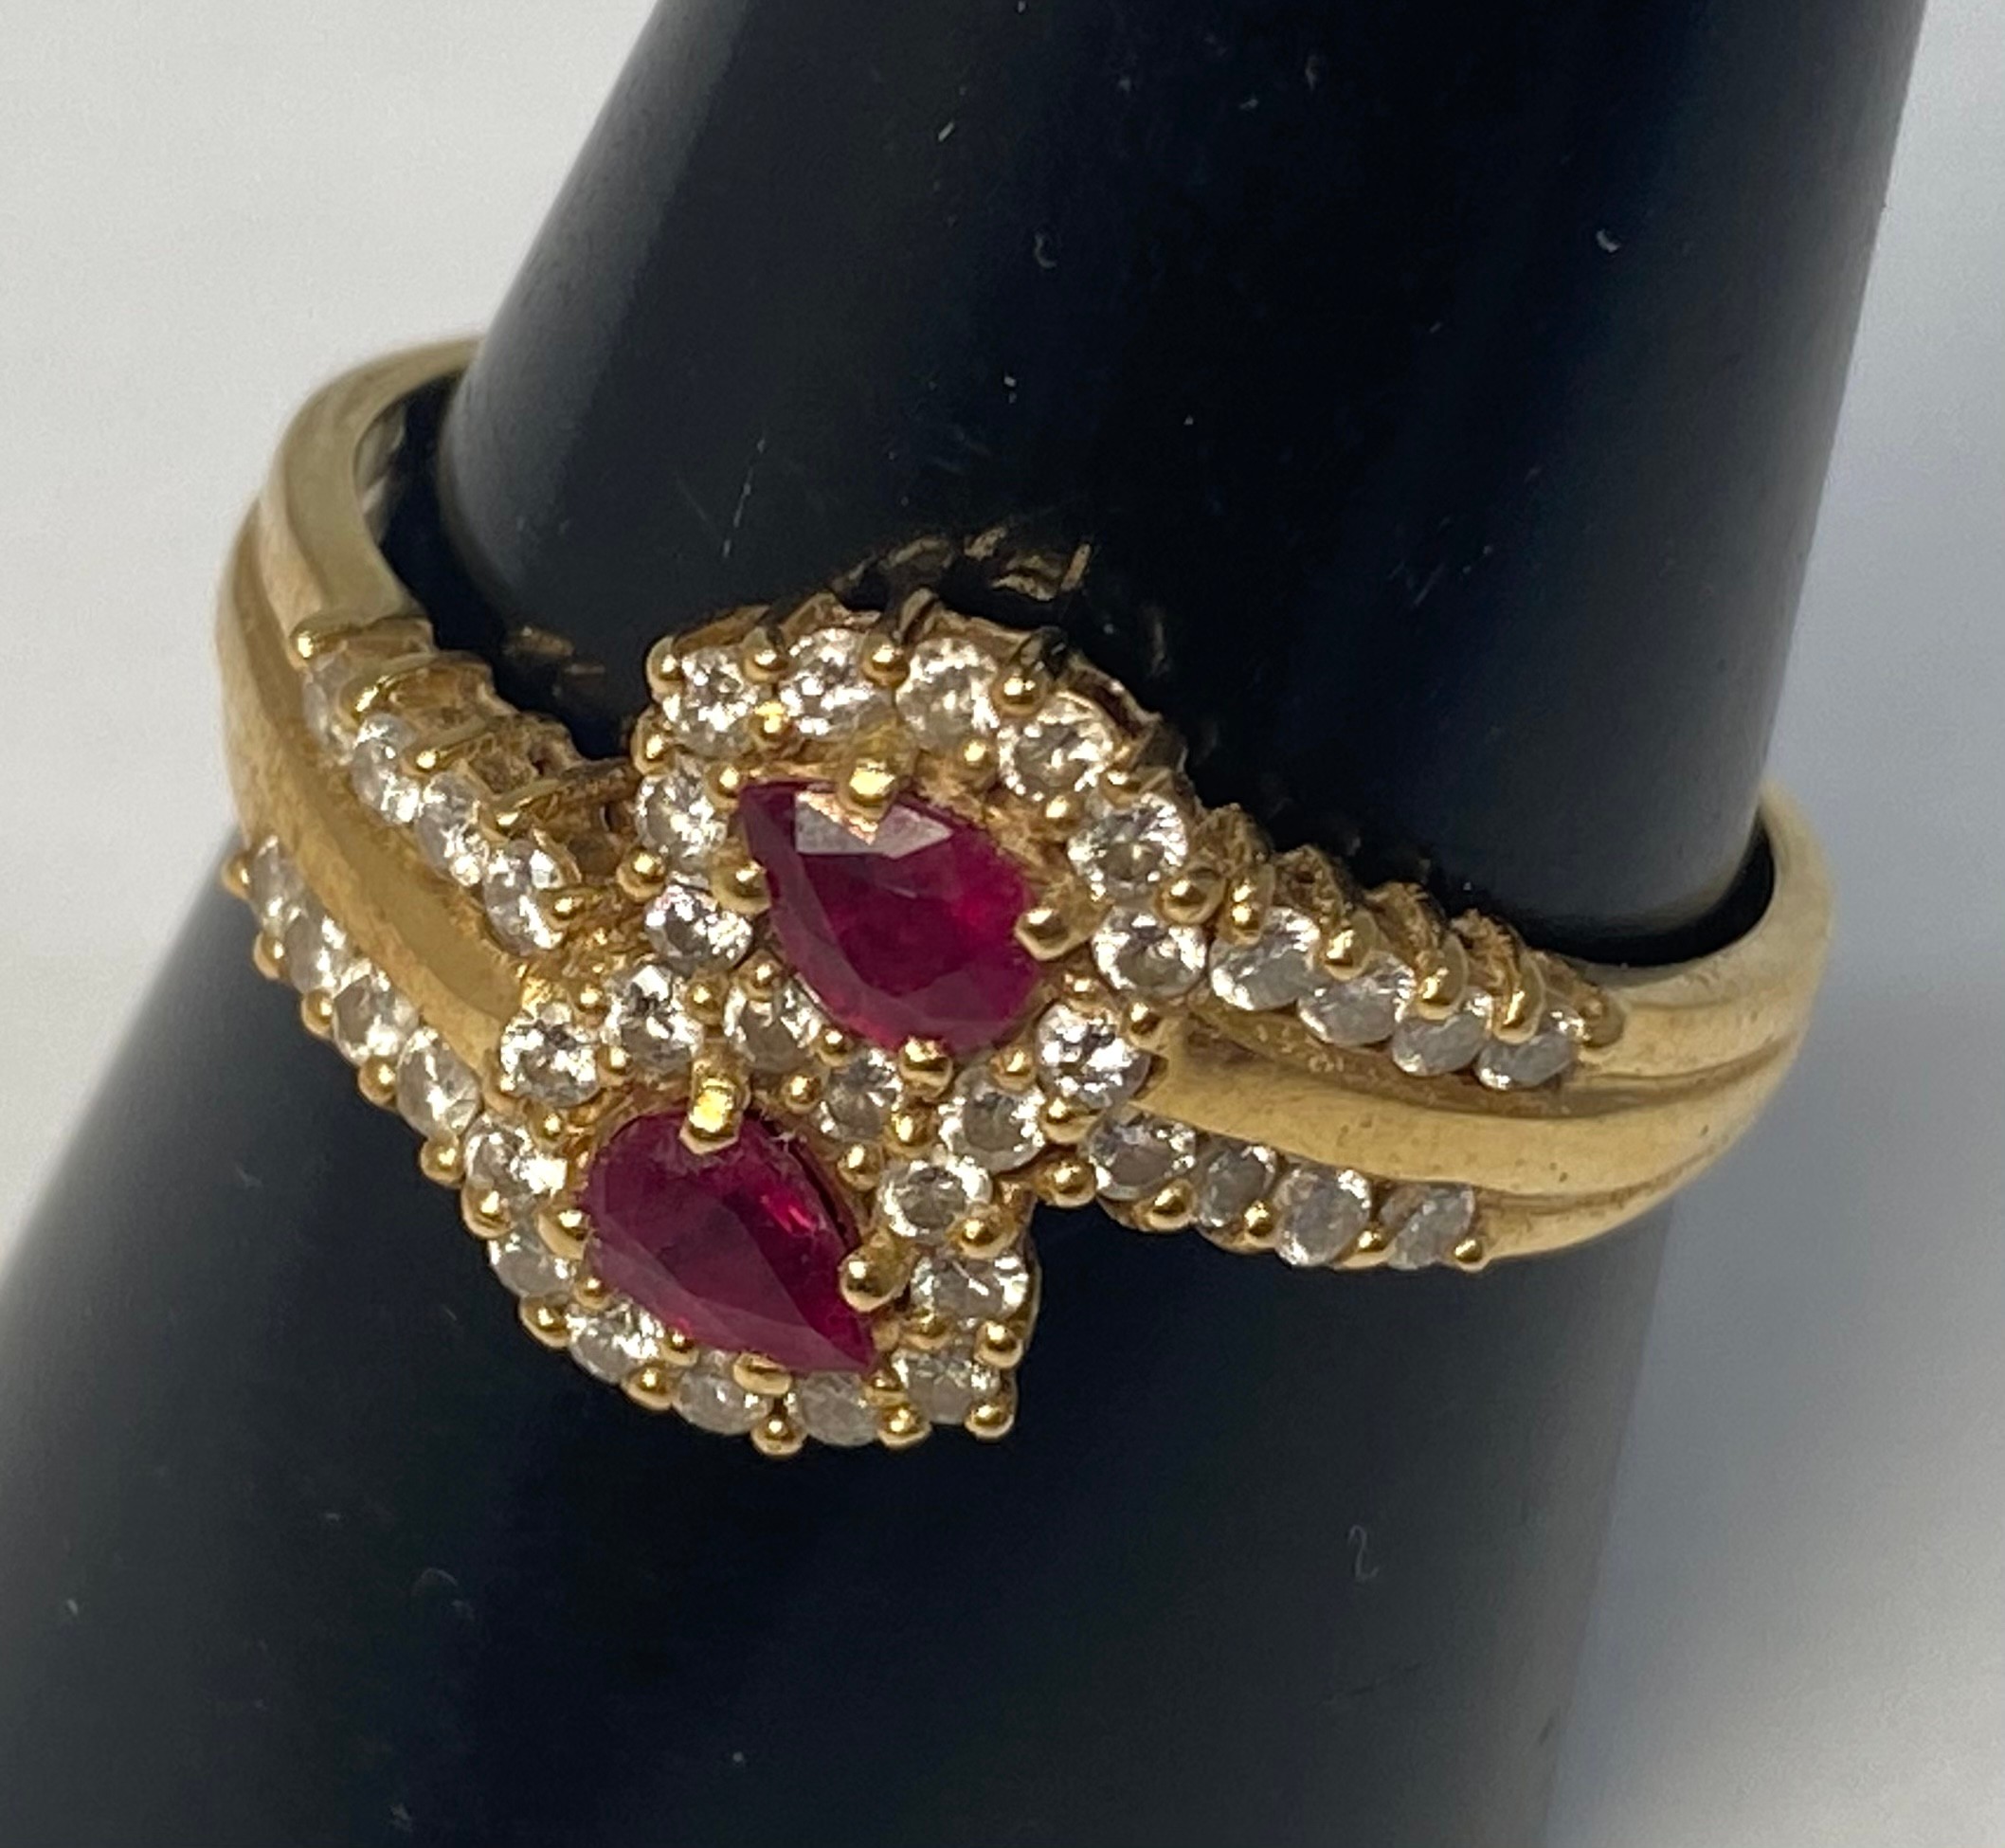 An 18ct gold ruby and diamond ring, set with 2 x pear shaped rubies and 38 x small round brilliant